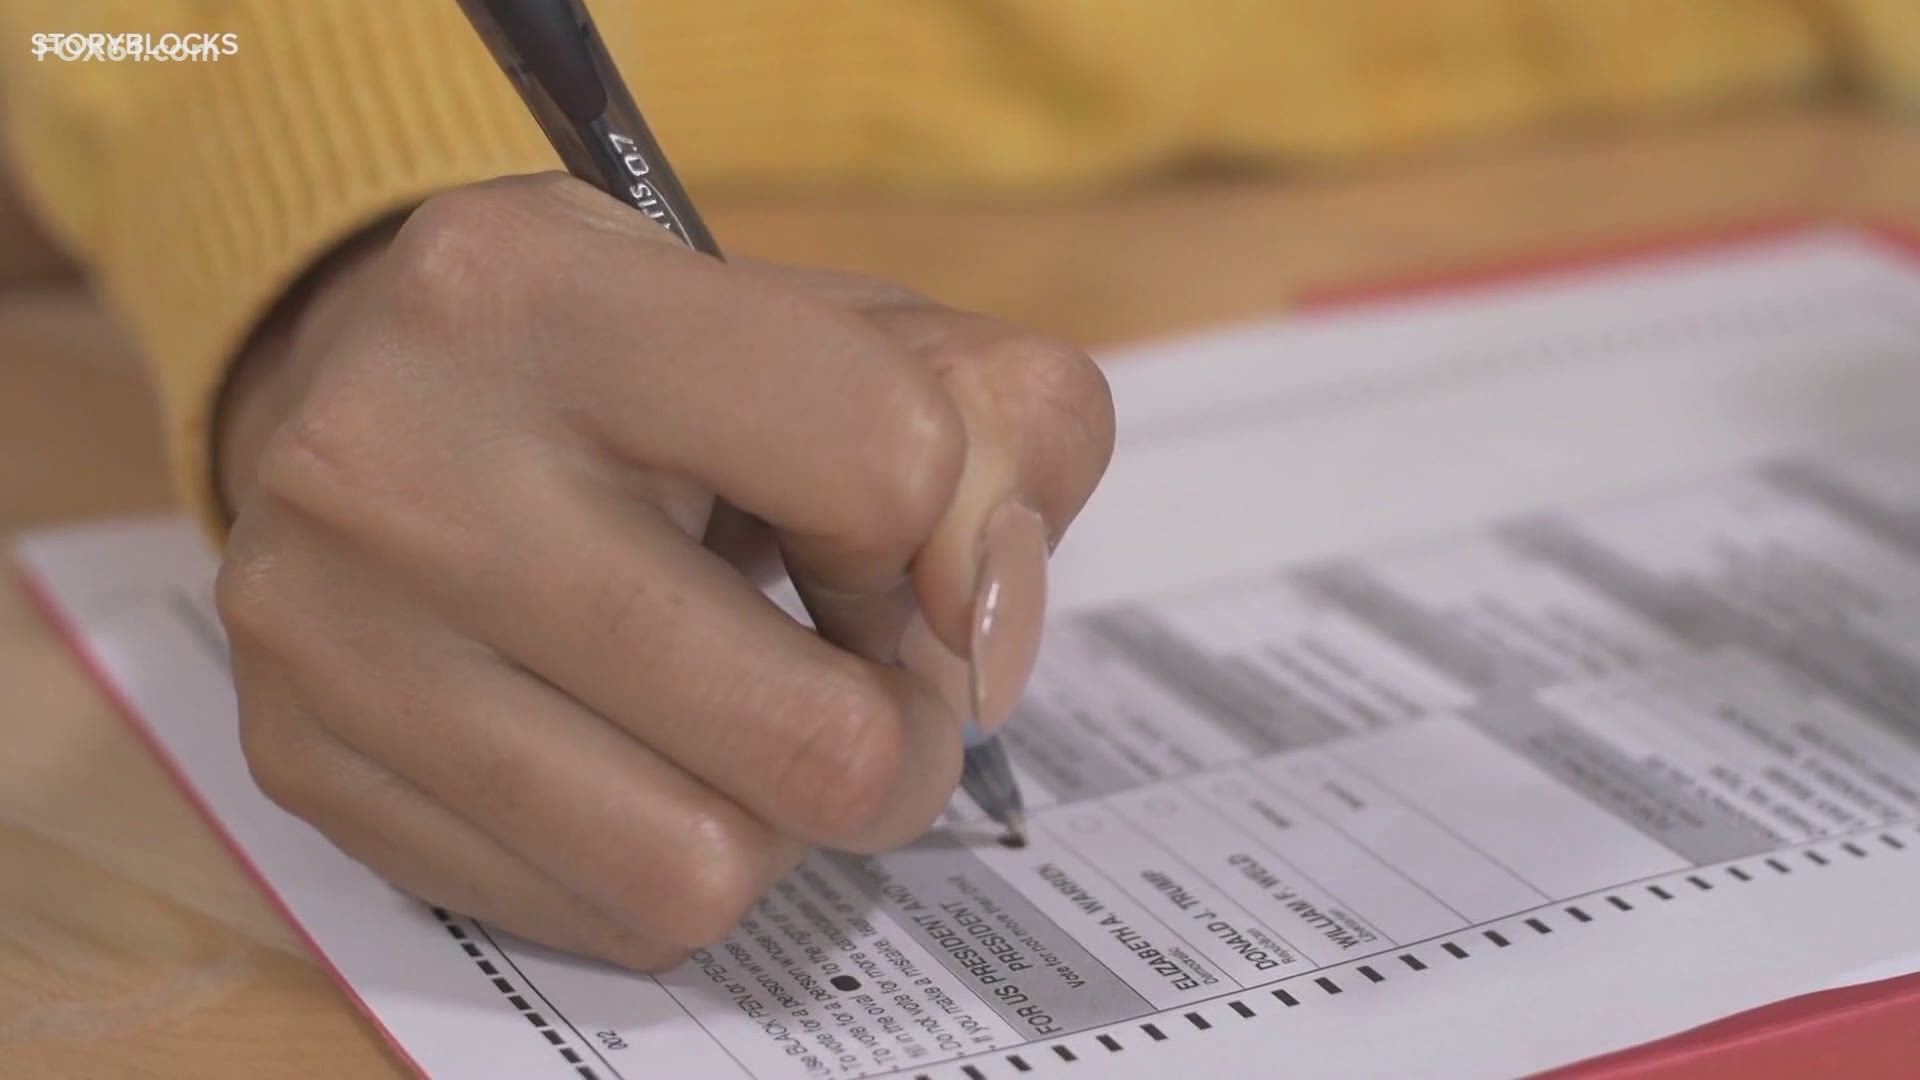 About 300,000 residents requested an absentee ballot.